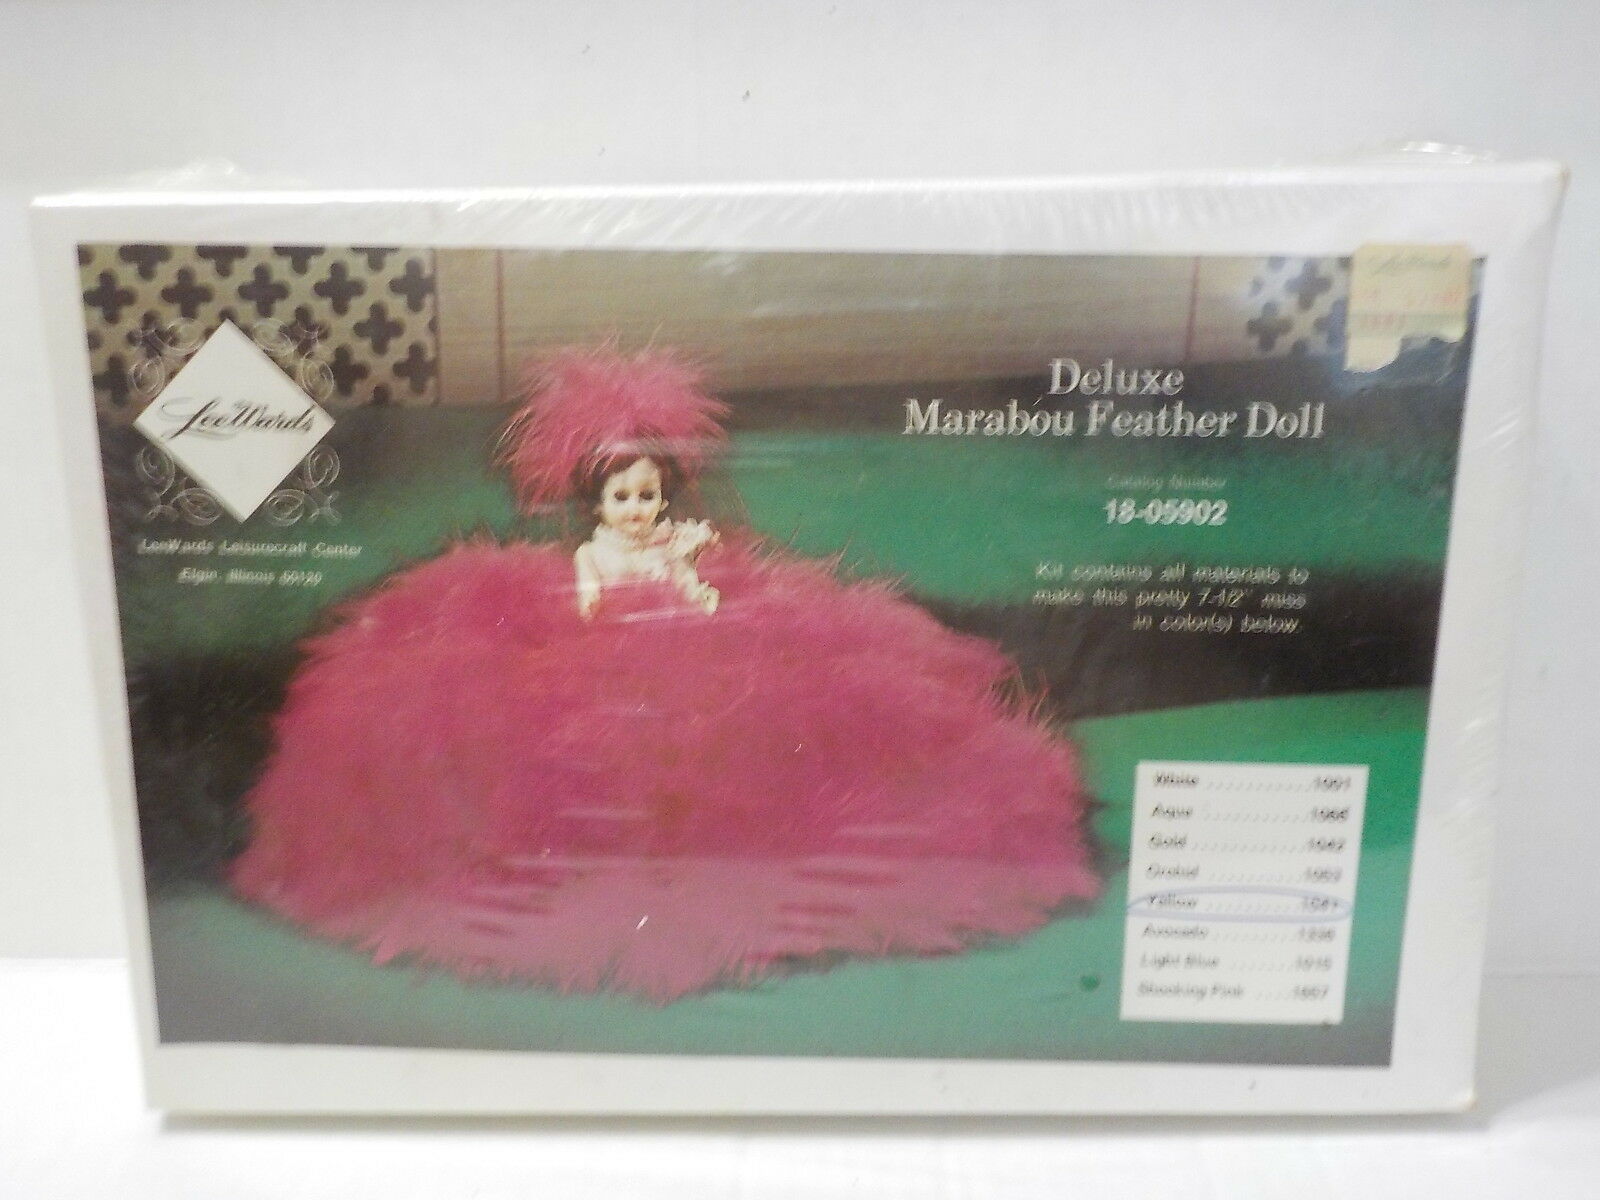 Vintage Lee Wards Deluxe Marabou Feather Doll Kit Yellow